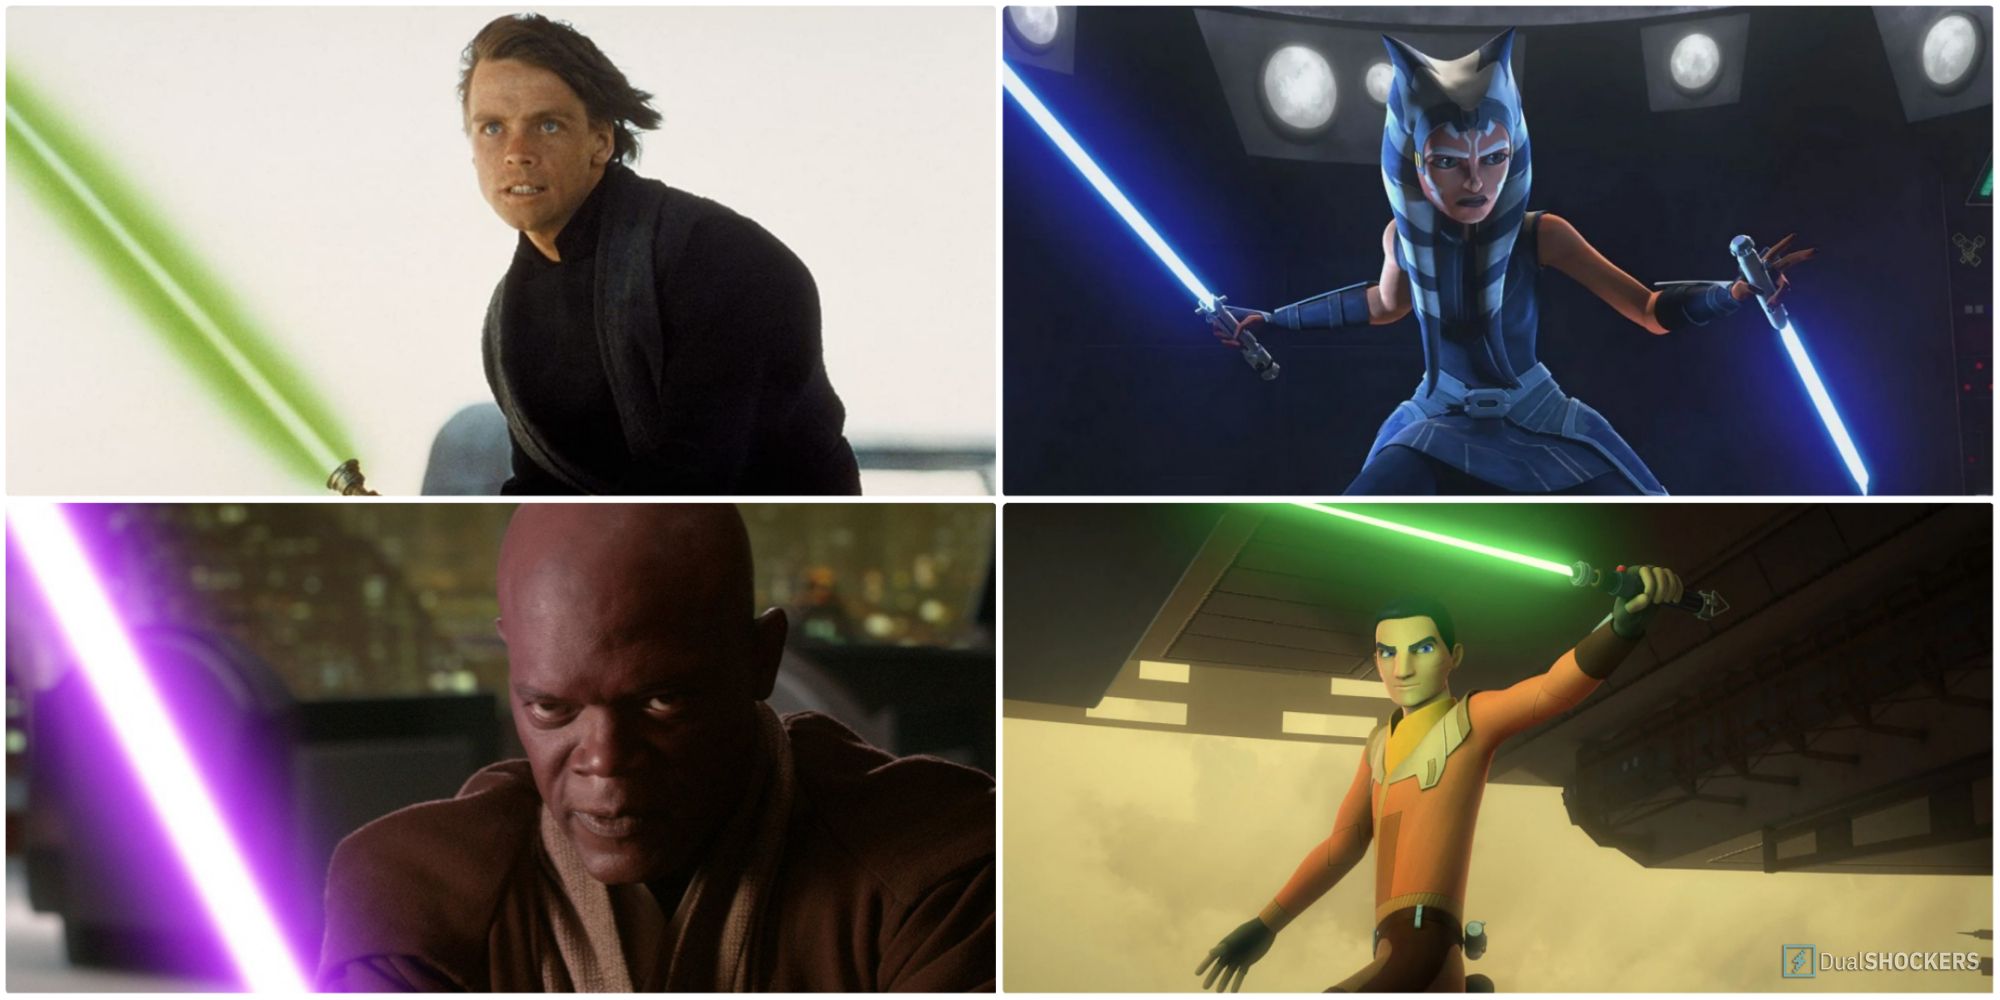 A Collage of Jedi From Star Wars Media